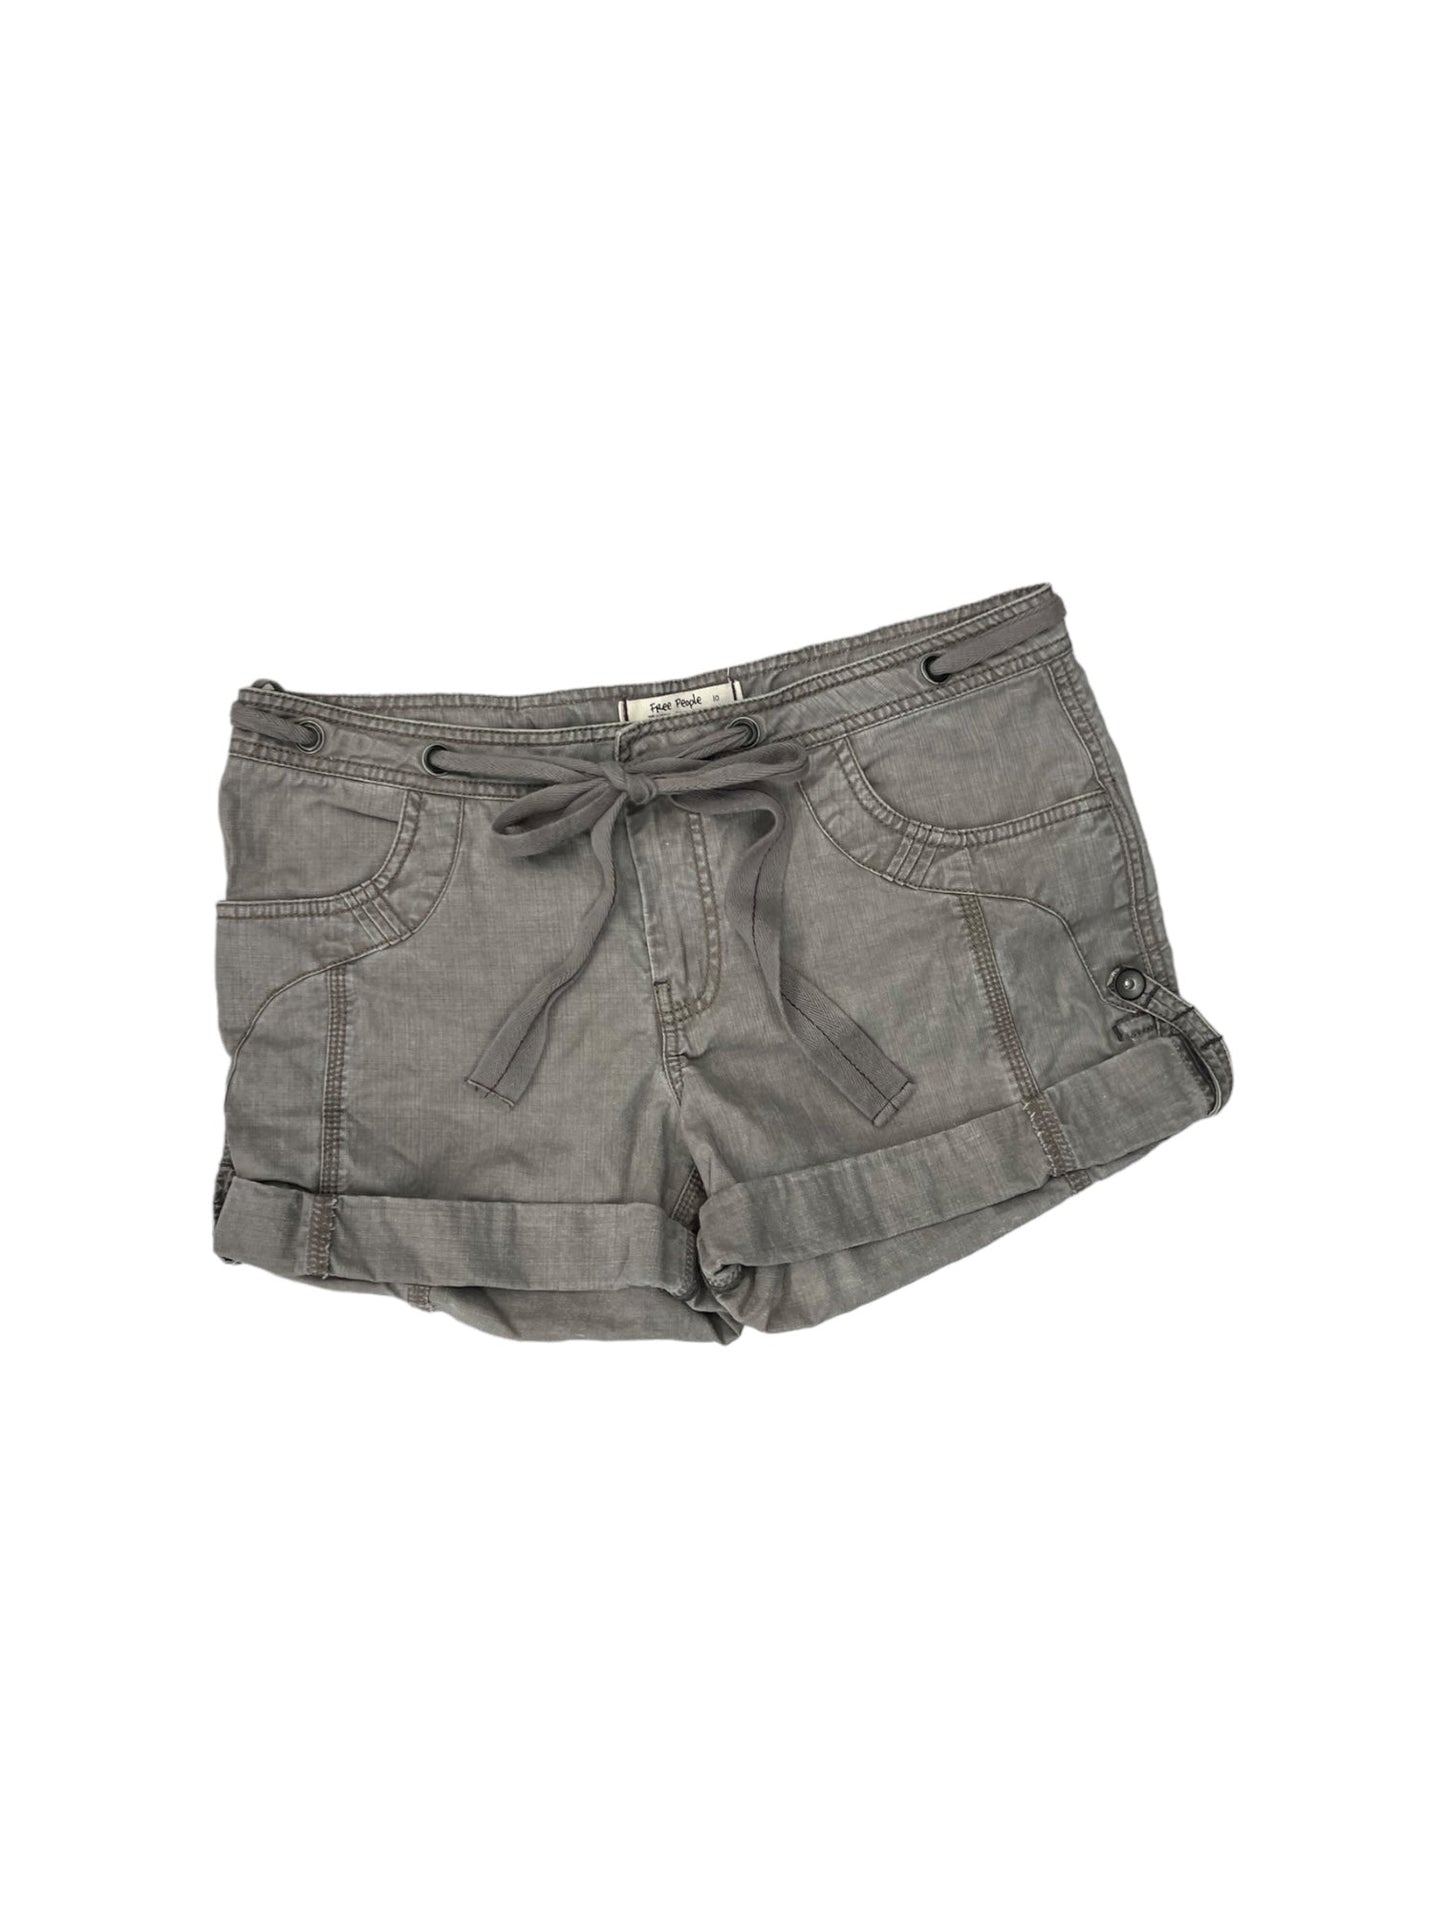 Taupe Shorts Free People, Size 10